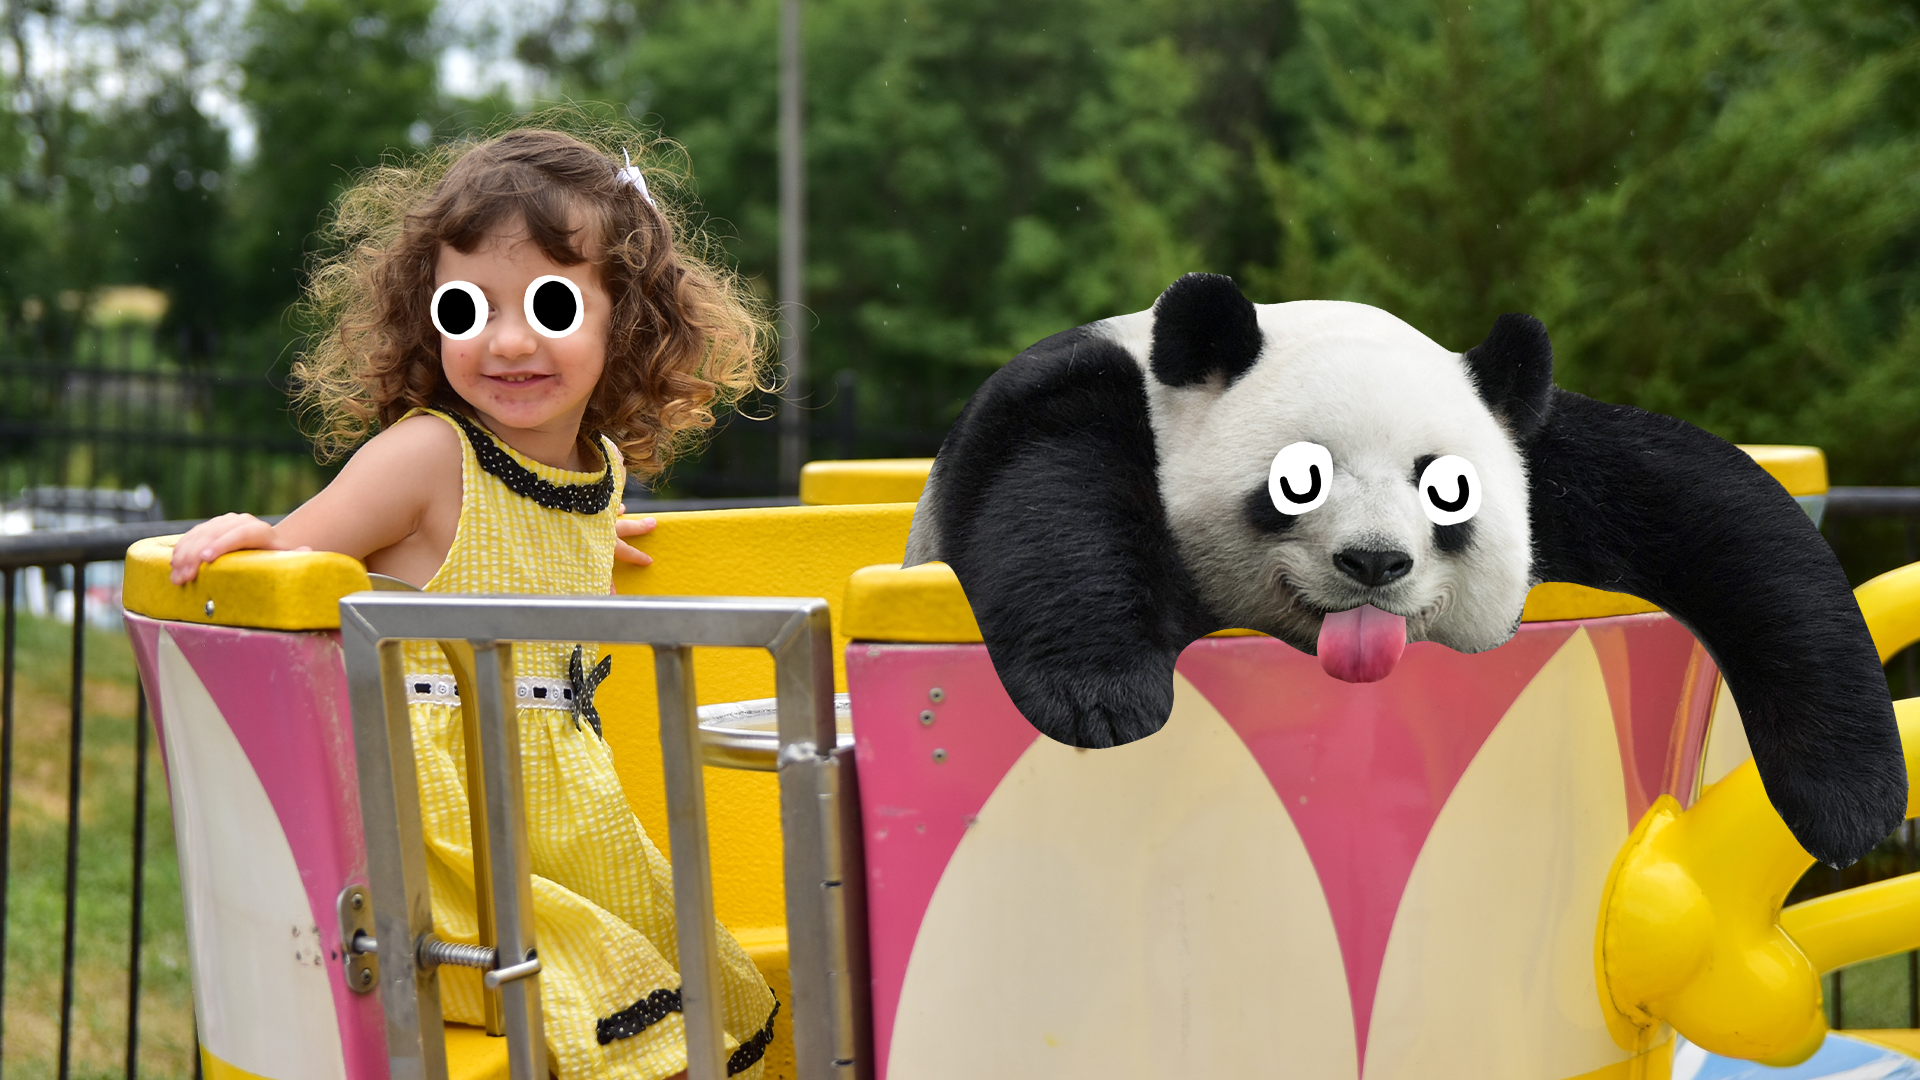 Girl on ride with derpy panda